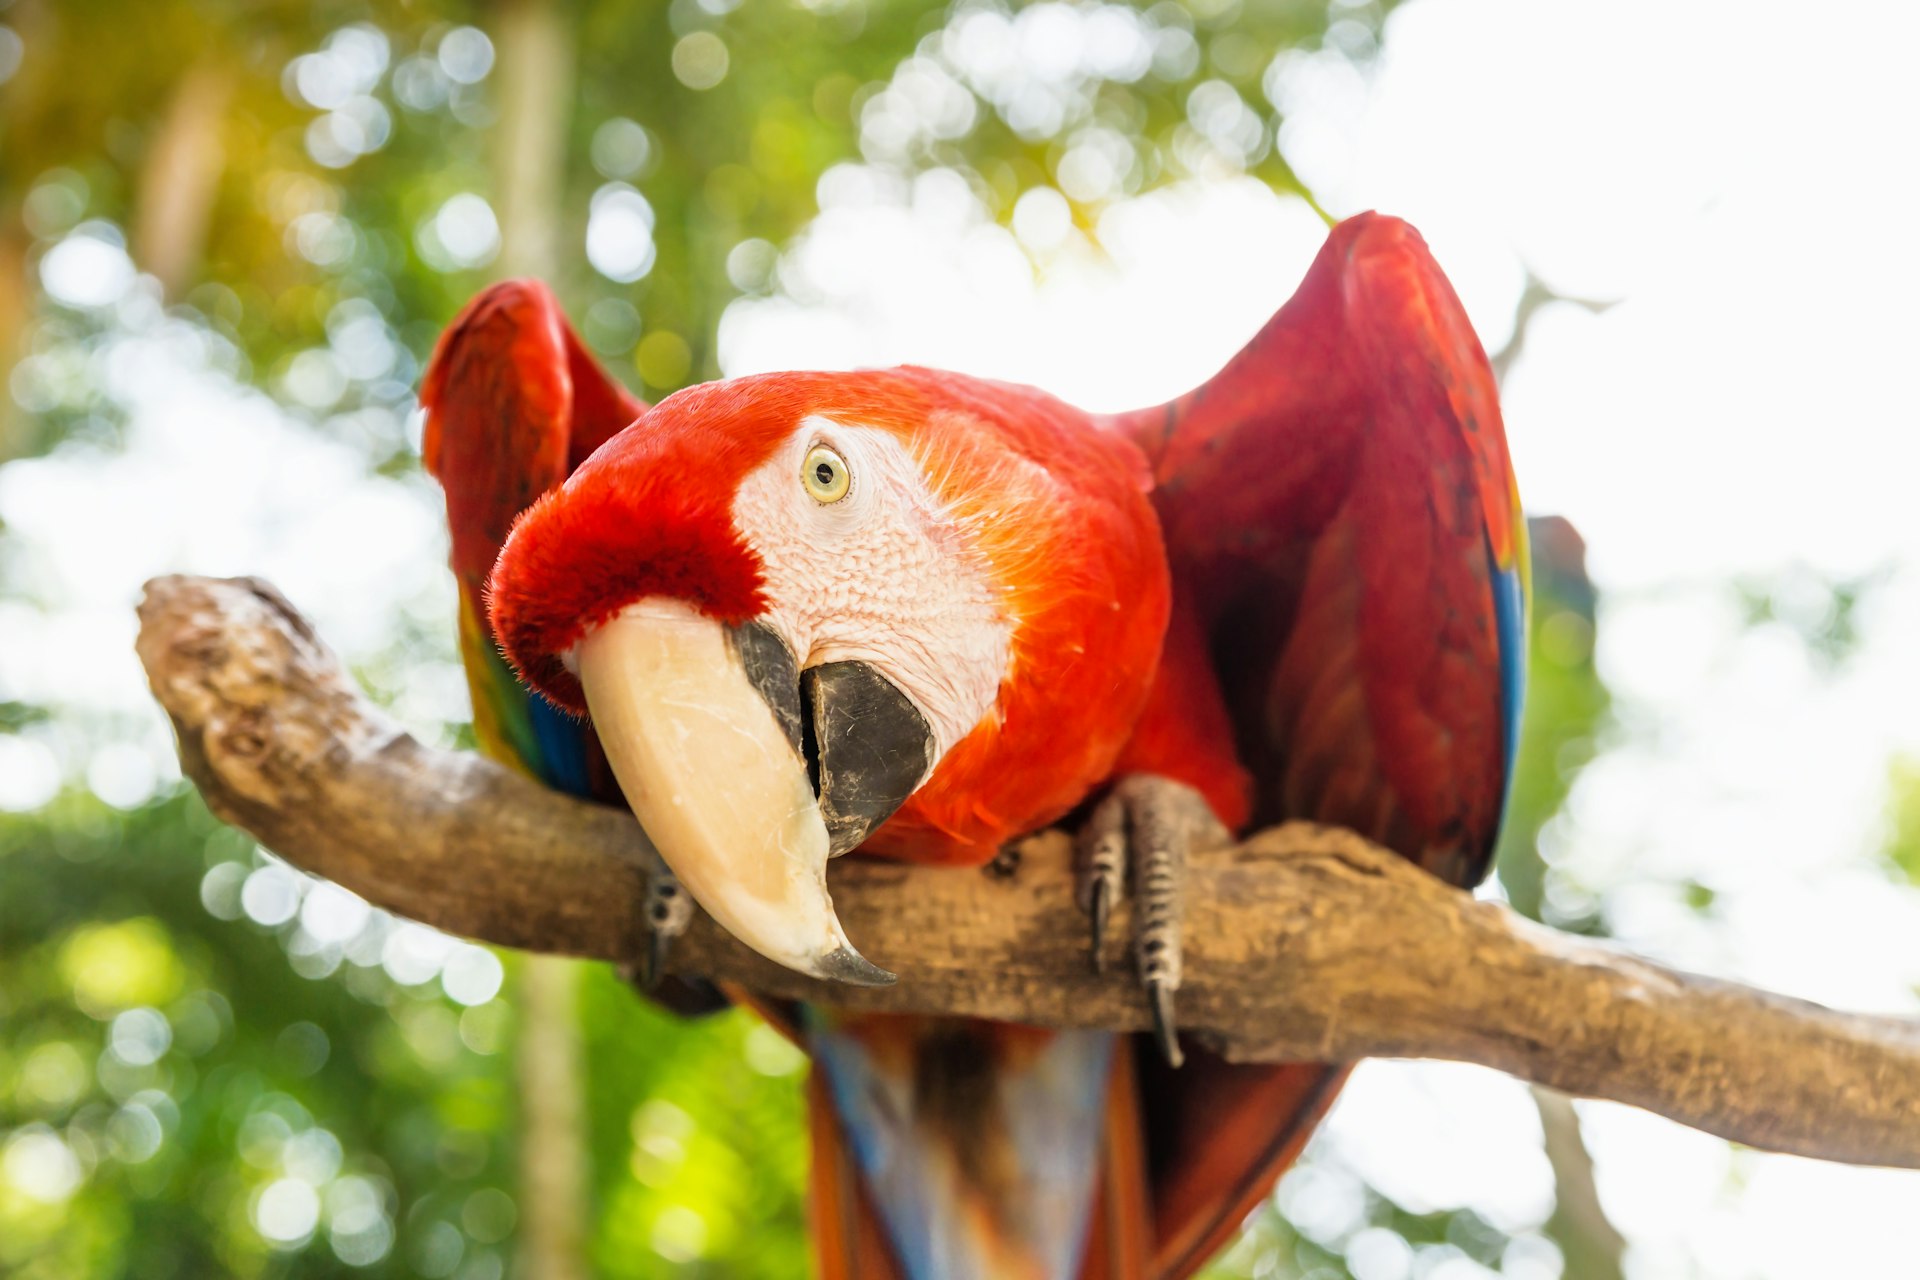 Playful-looking scarlett macaw parrot in Macaw Mountain, Copán, Honduras, Central America